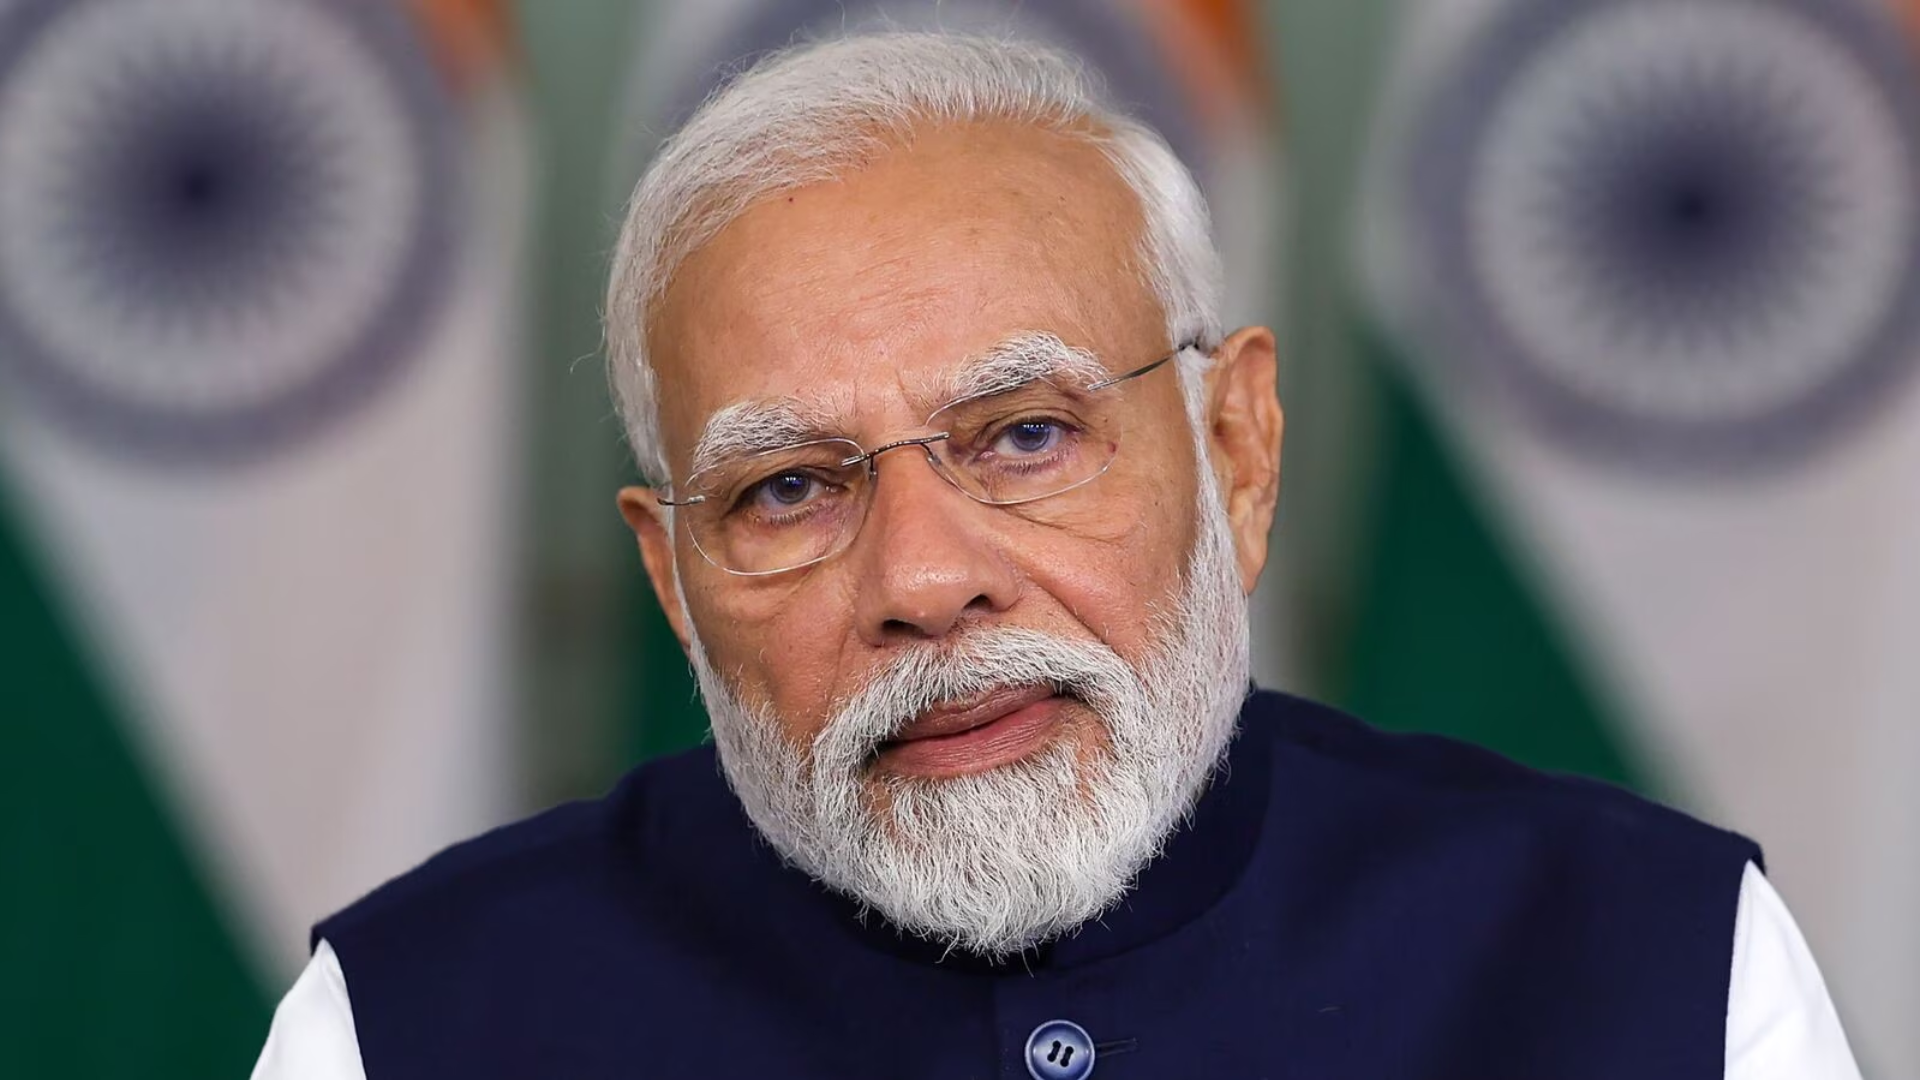 Entire nation worried about law and order in Karnataka: PM Modi